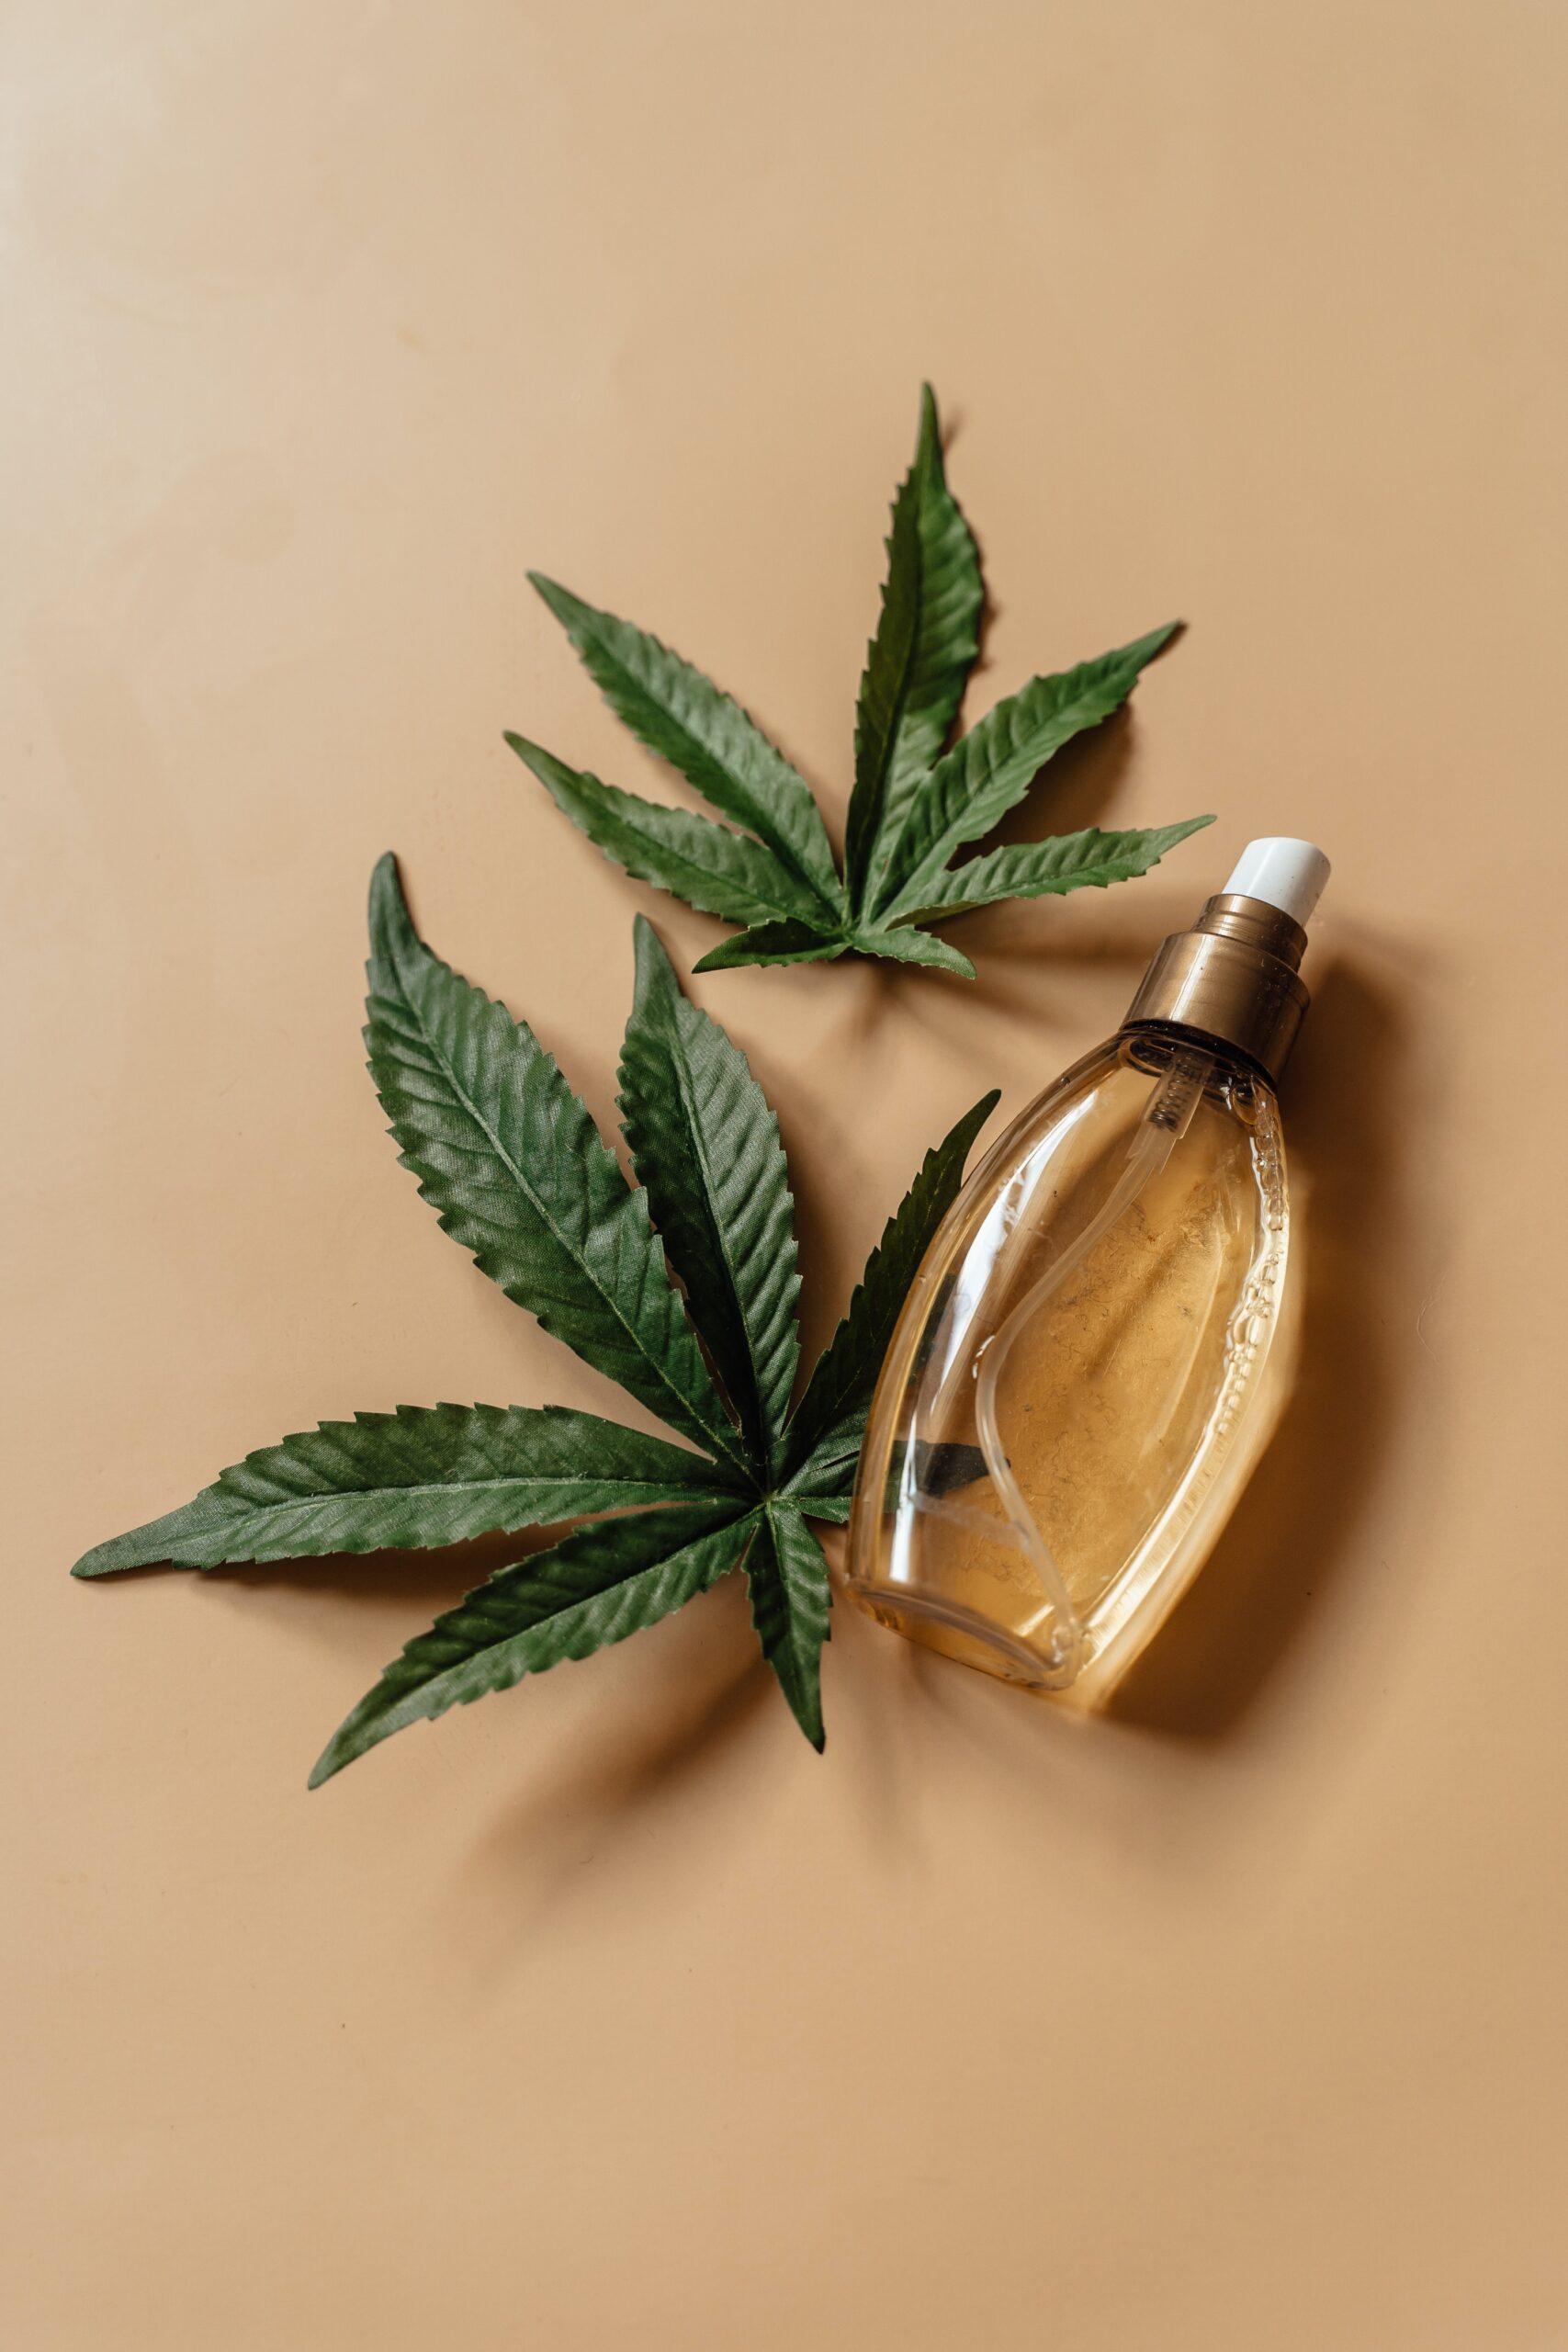 Can Delta 8 tincture a recent addition in cannabis products offer the same benefits as other forms?